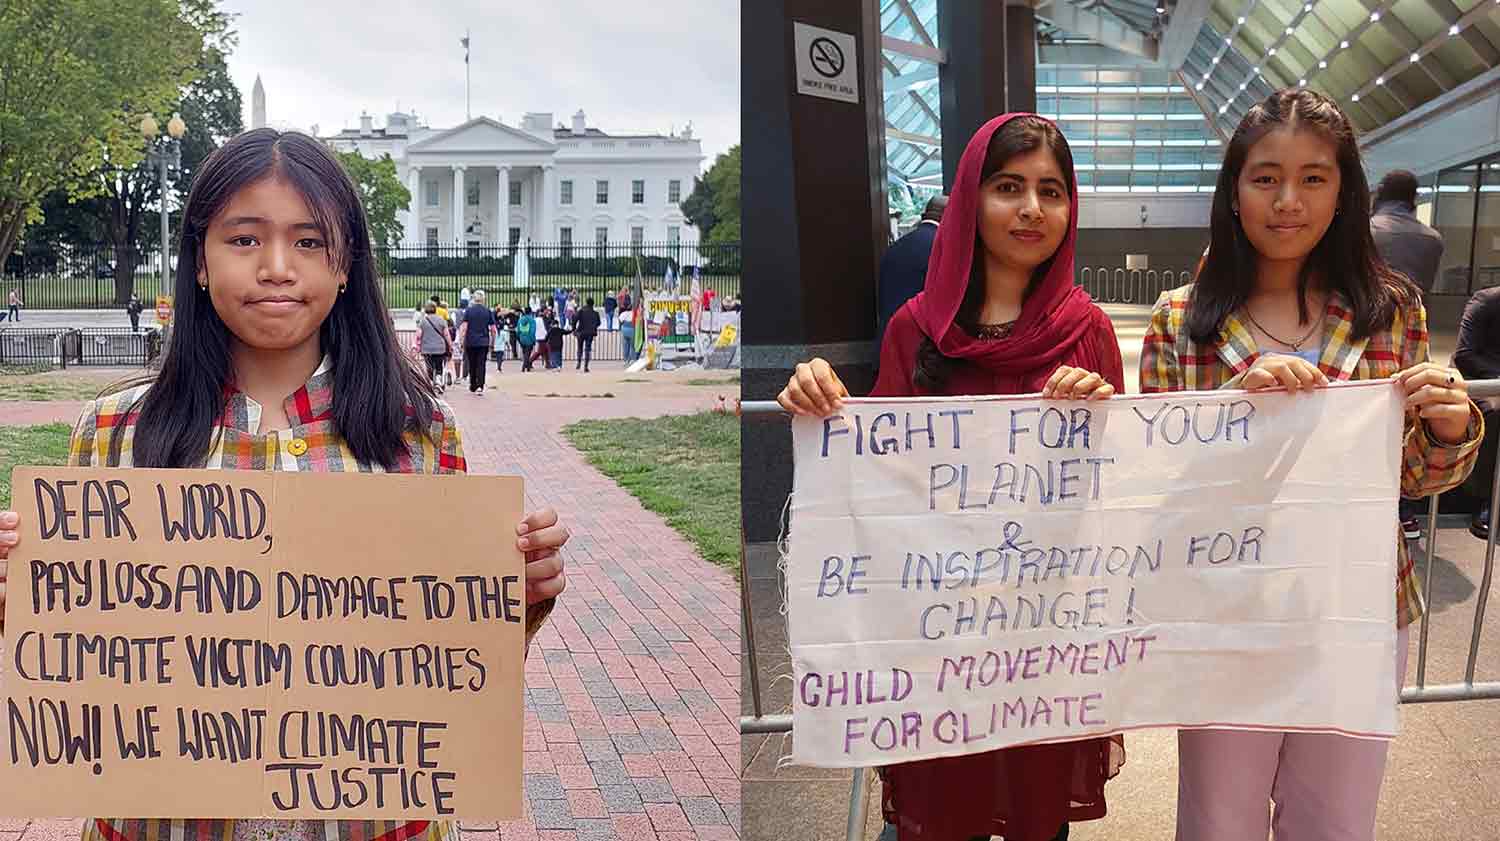 Side by side photos show Licy Kangujam in front of the White House holding up a sign demanding climate justice and a girl and Licy Kangujam and Malala Yousafzai posing together.